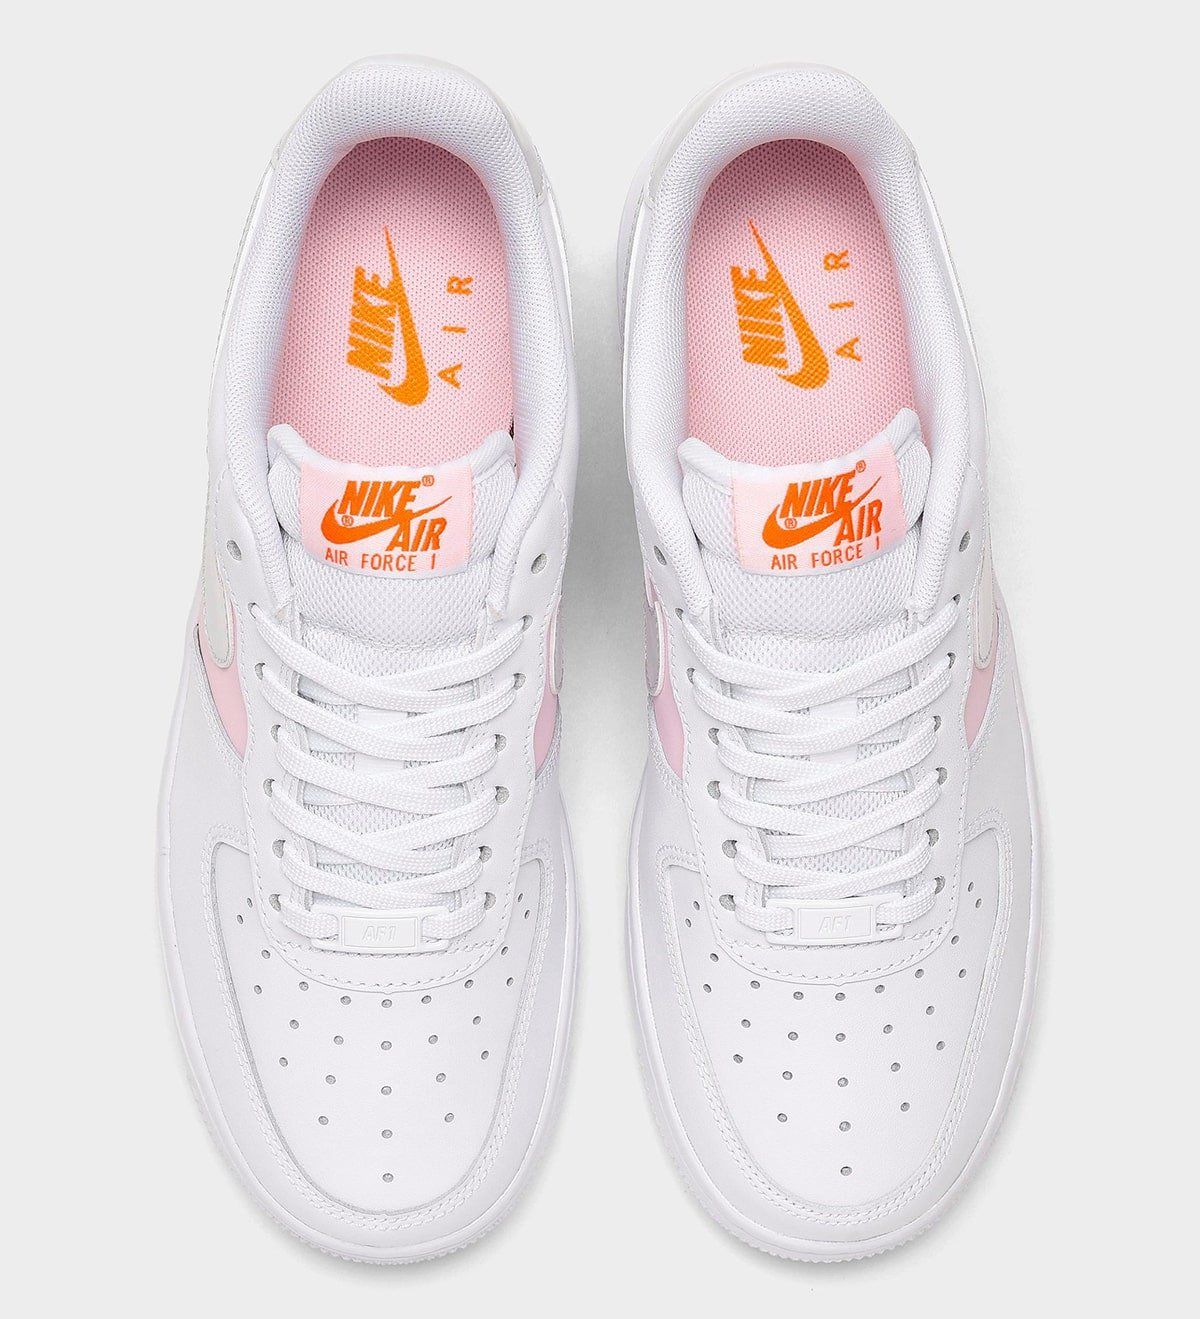 Available Now // Nike Air Force 1 Low SE WMNS 